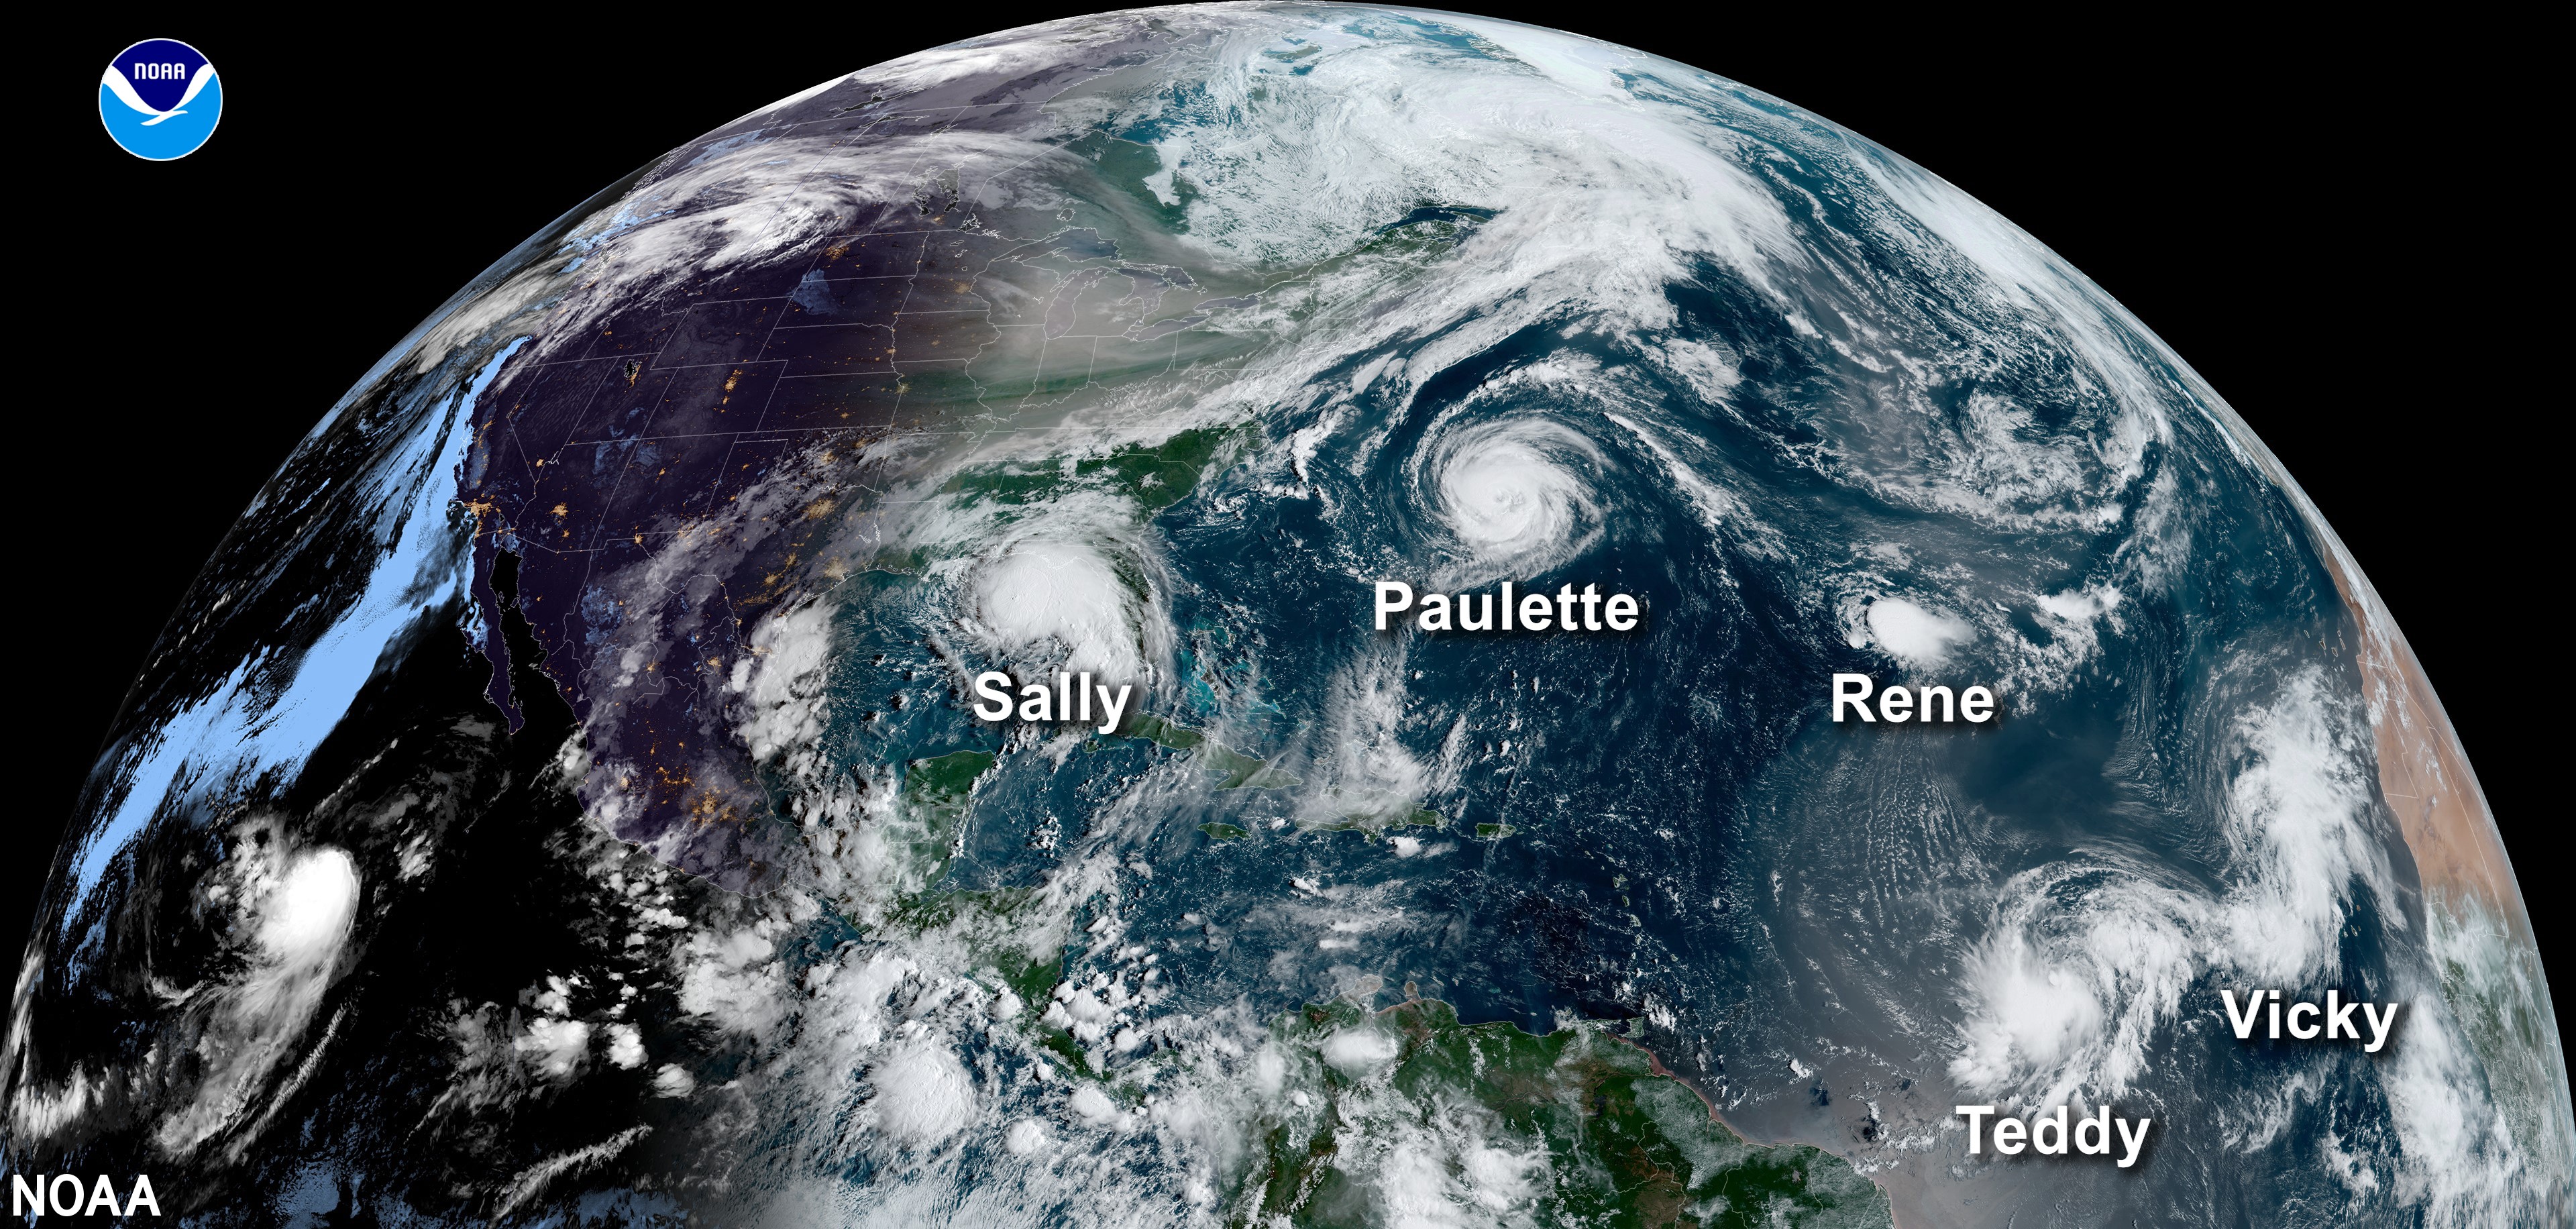 Figure 2. On September 14th, 2020, this satellite image captured 5 tropical systems (2 Hurricanes and 3 Tropical storms) in the Atlantic Ocean at the same time. September 2020 experienced the formation of a total of 10 named storms – the highest number for any month on record according to NOAA.